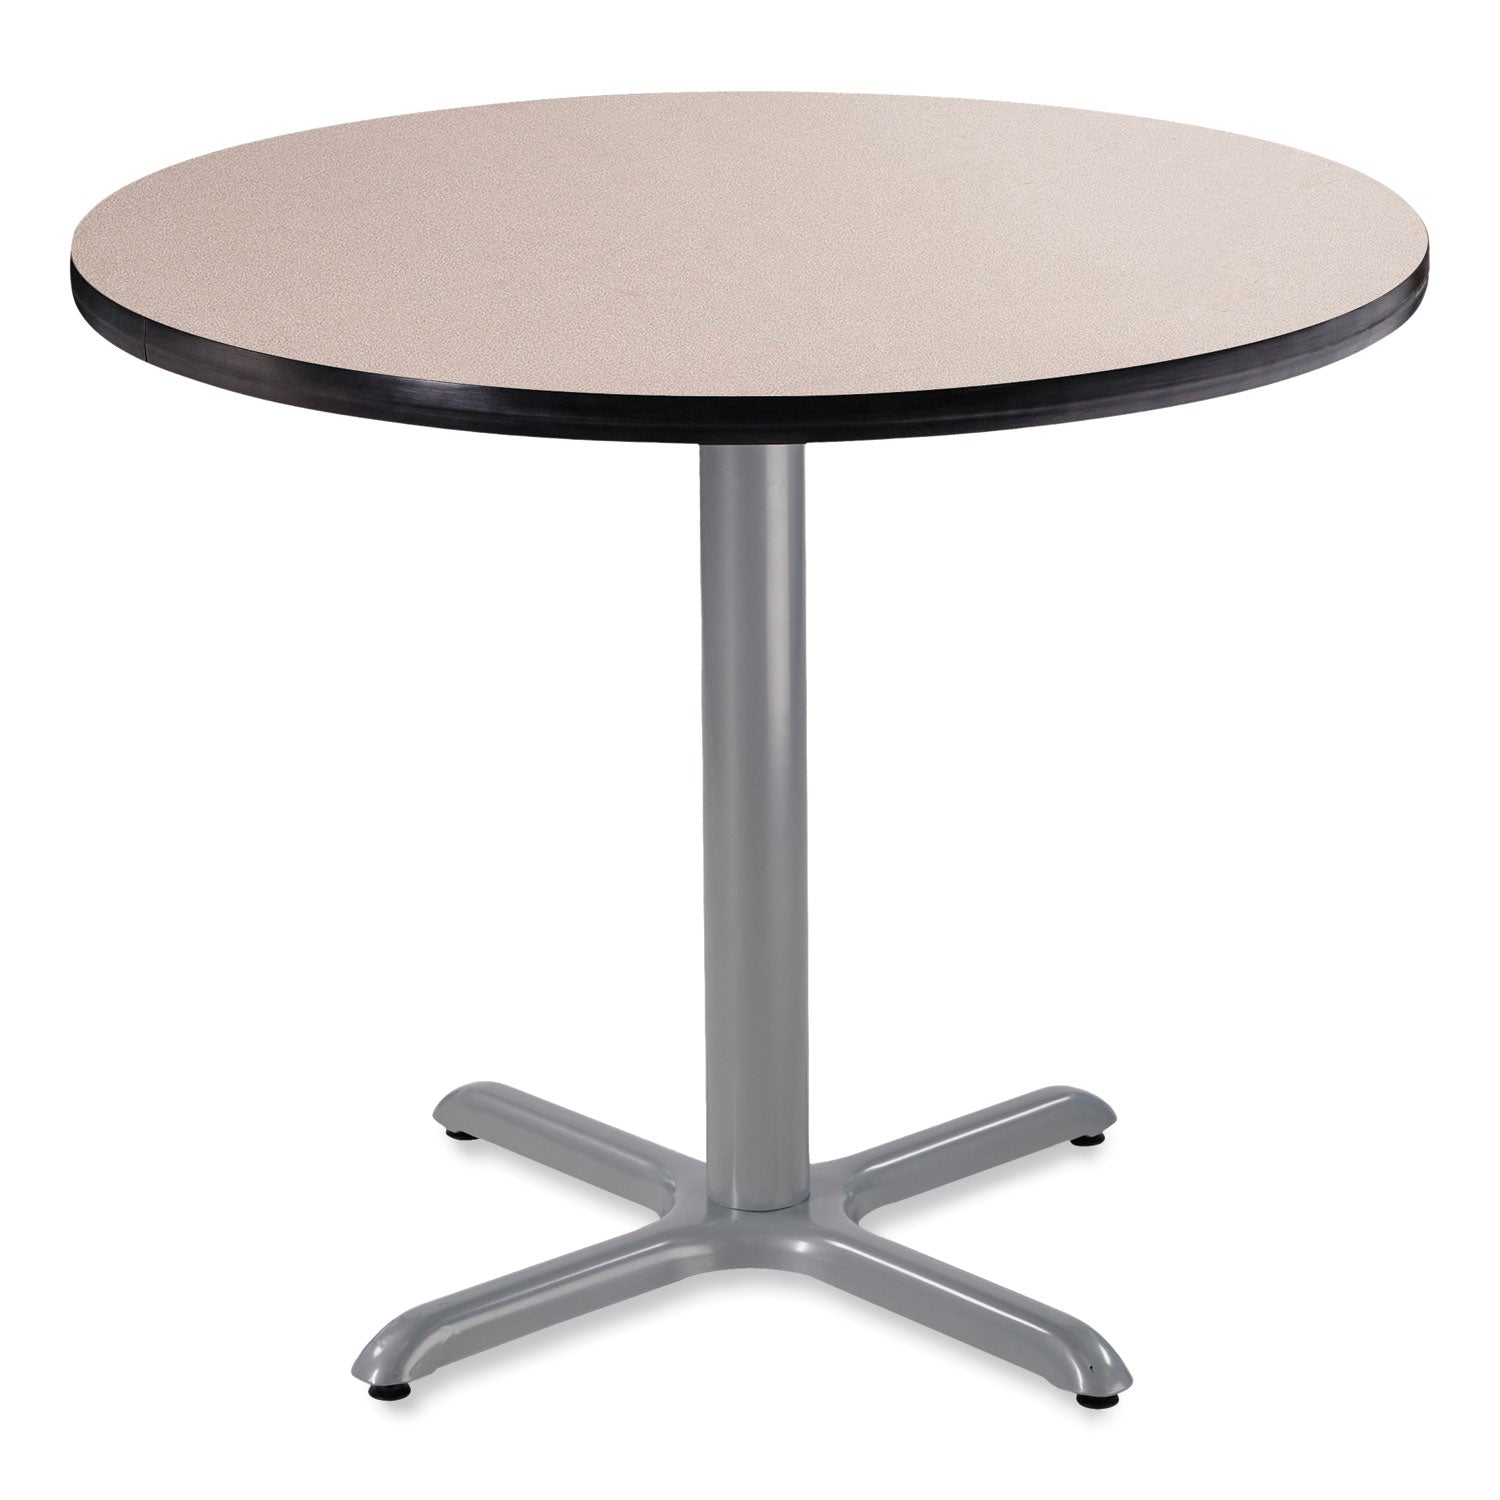 cafe-table-36-diameter-x-30h-round-top-x-base-gray-nebula-top-gray-base-ships-in-7-10-business-days_npscg13636xd1gy - 1